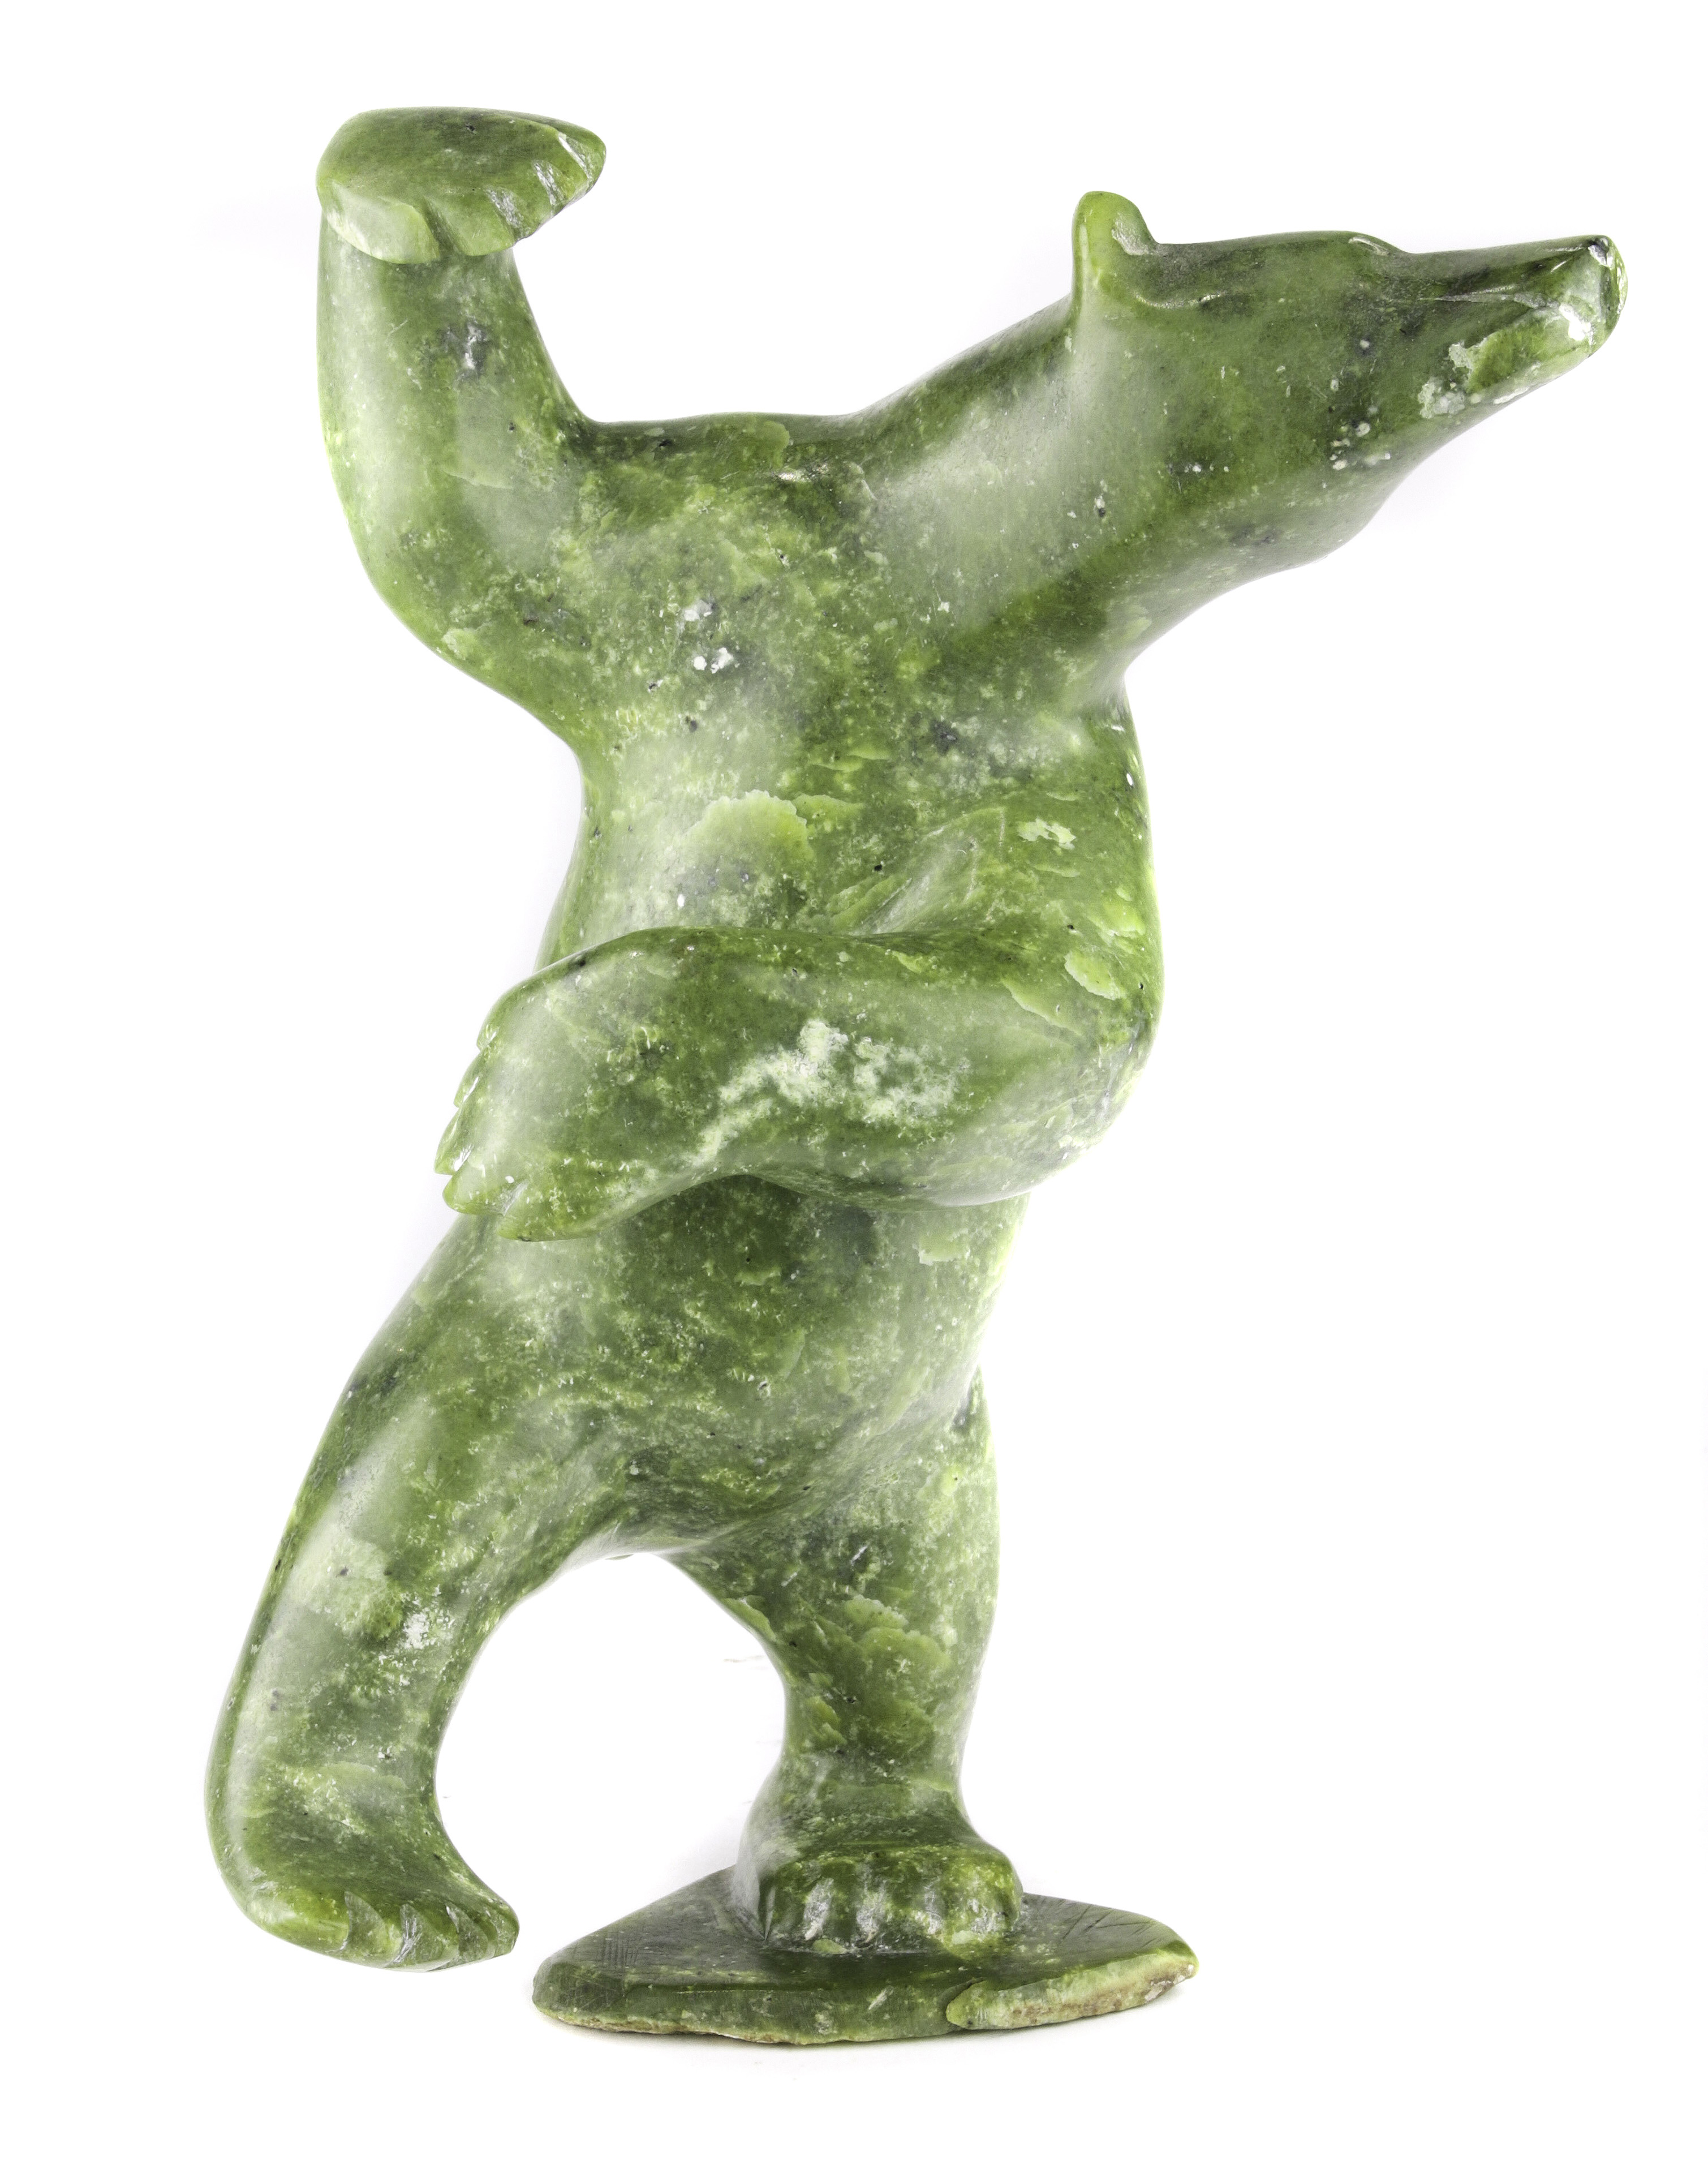 AN INUIT FIGURAL SCULPTURE BY HENRY